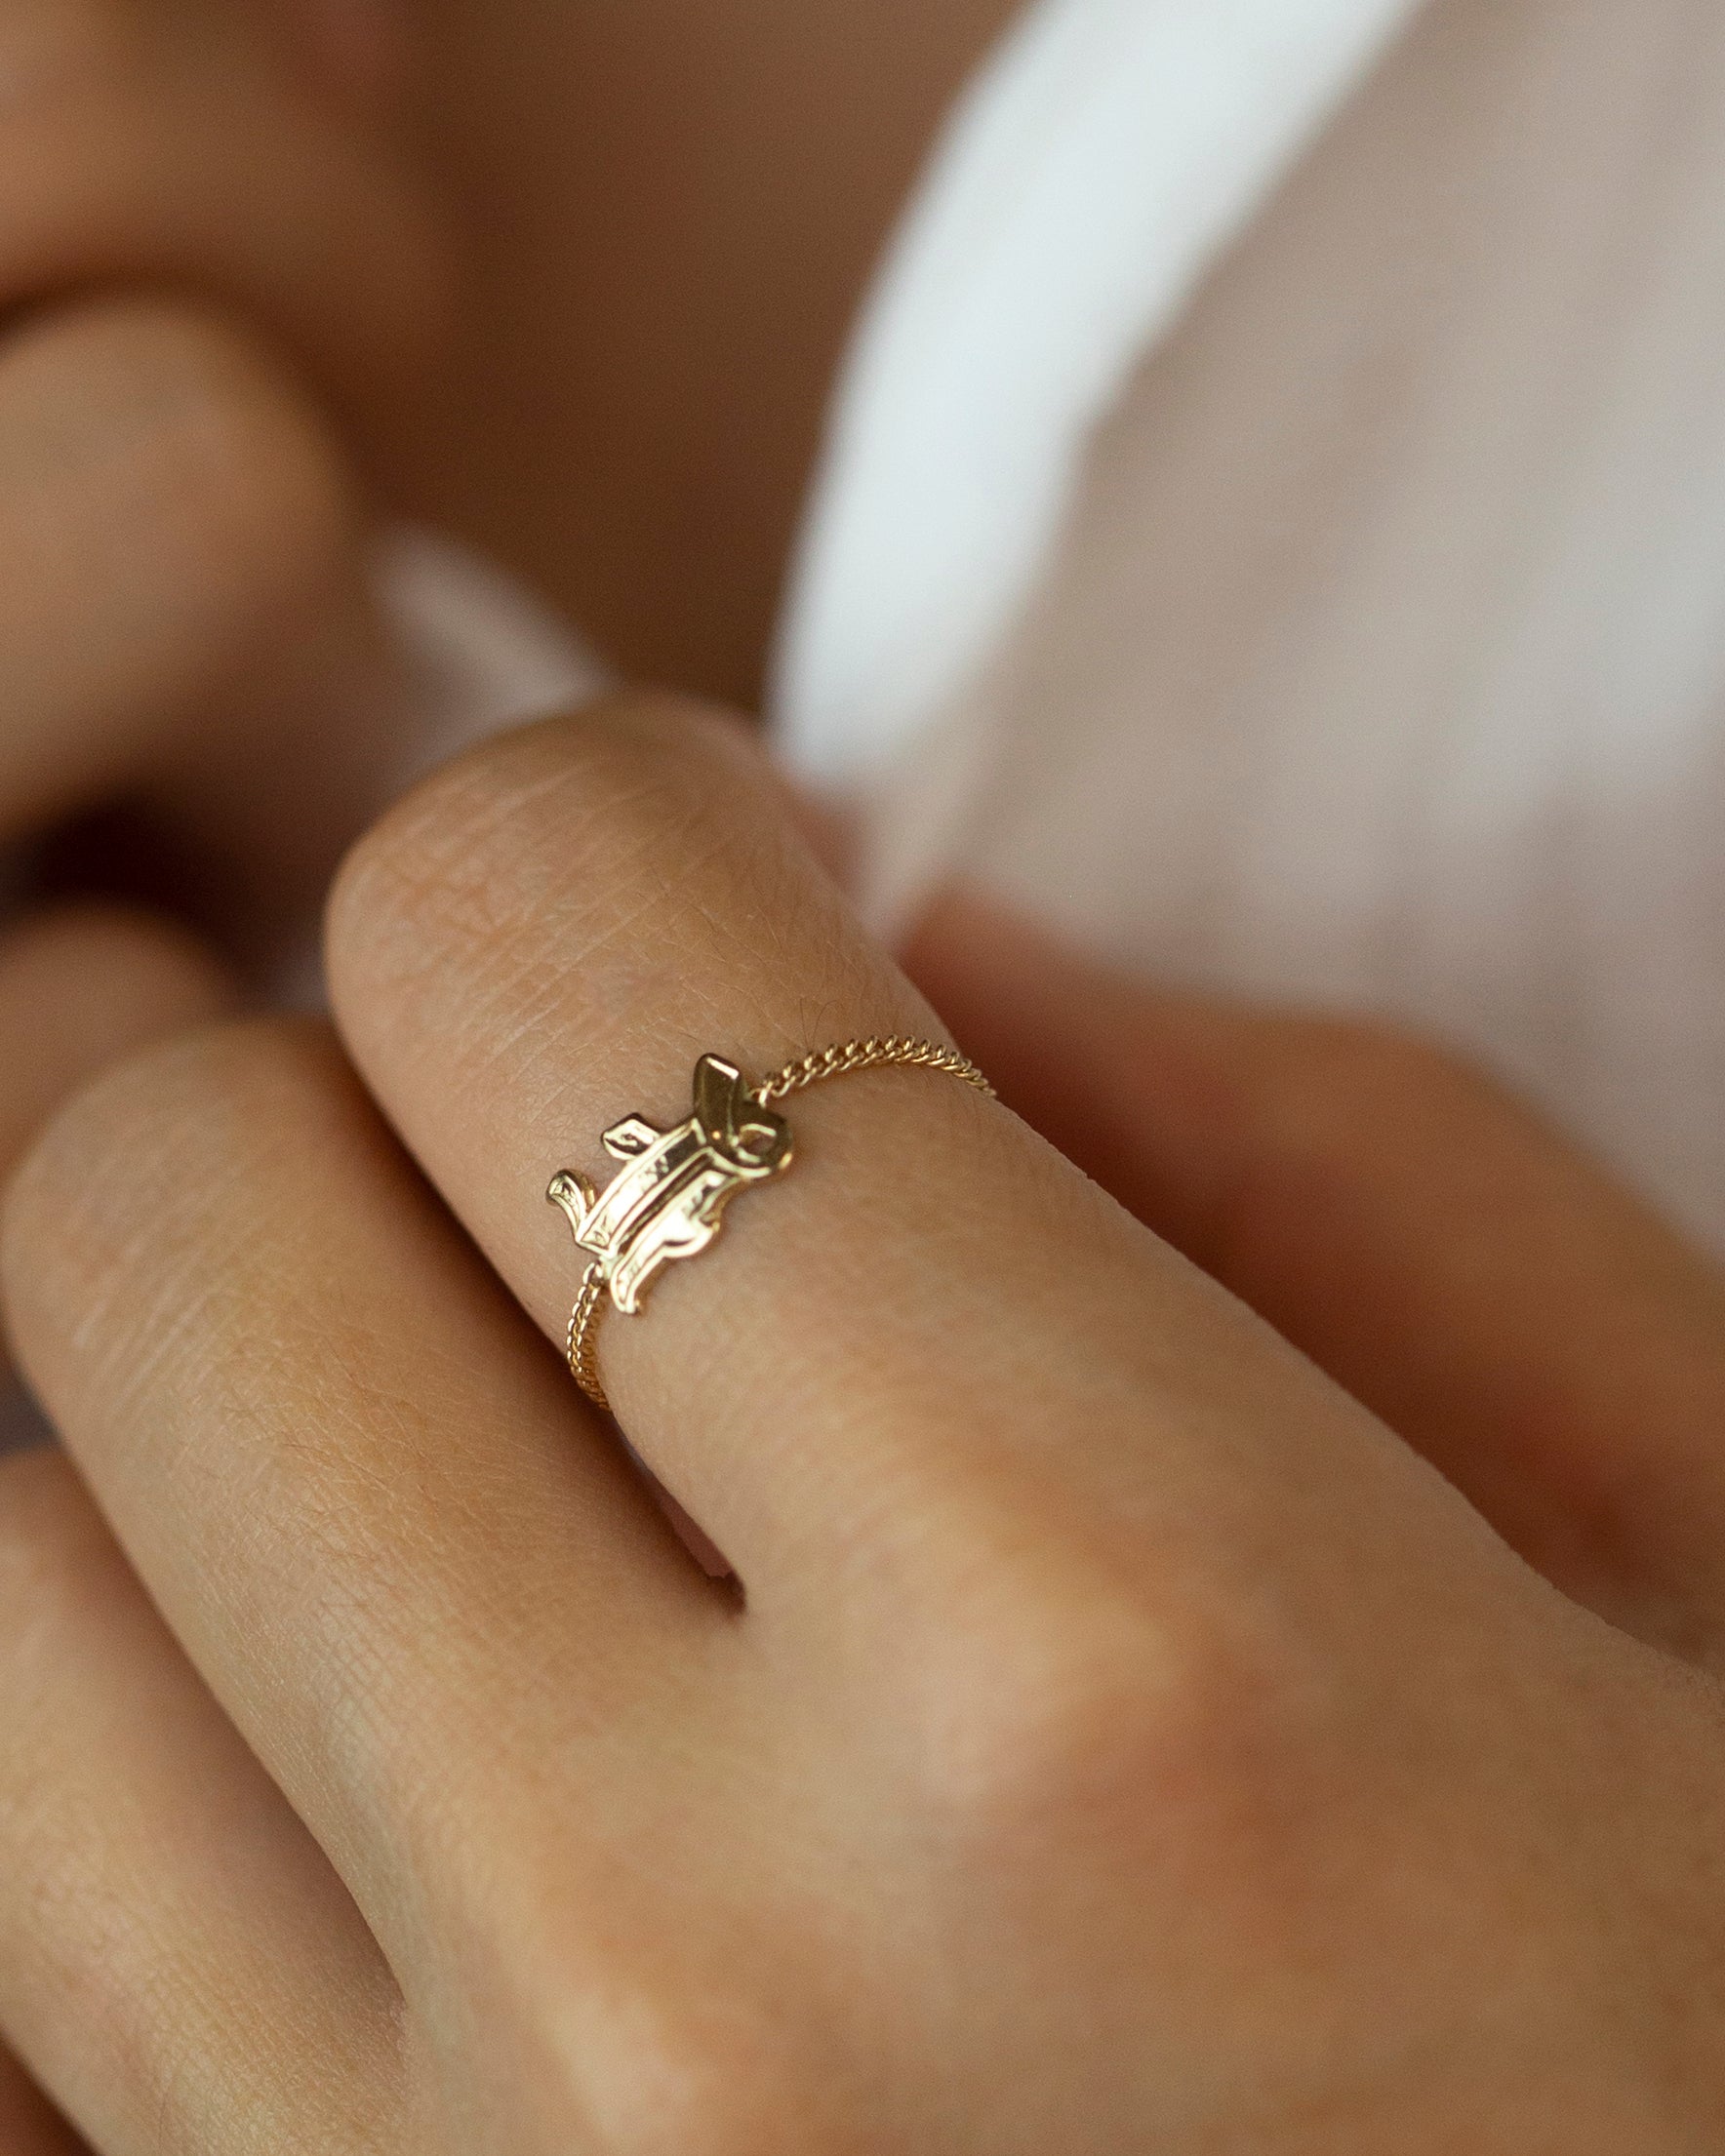 The Customized Double Name Ring | En Route Jewelry